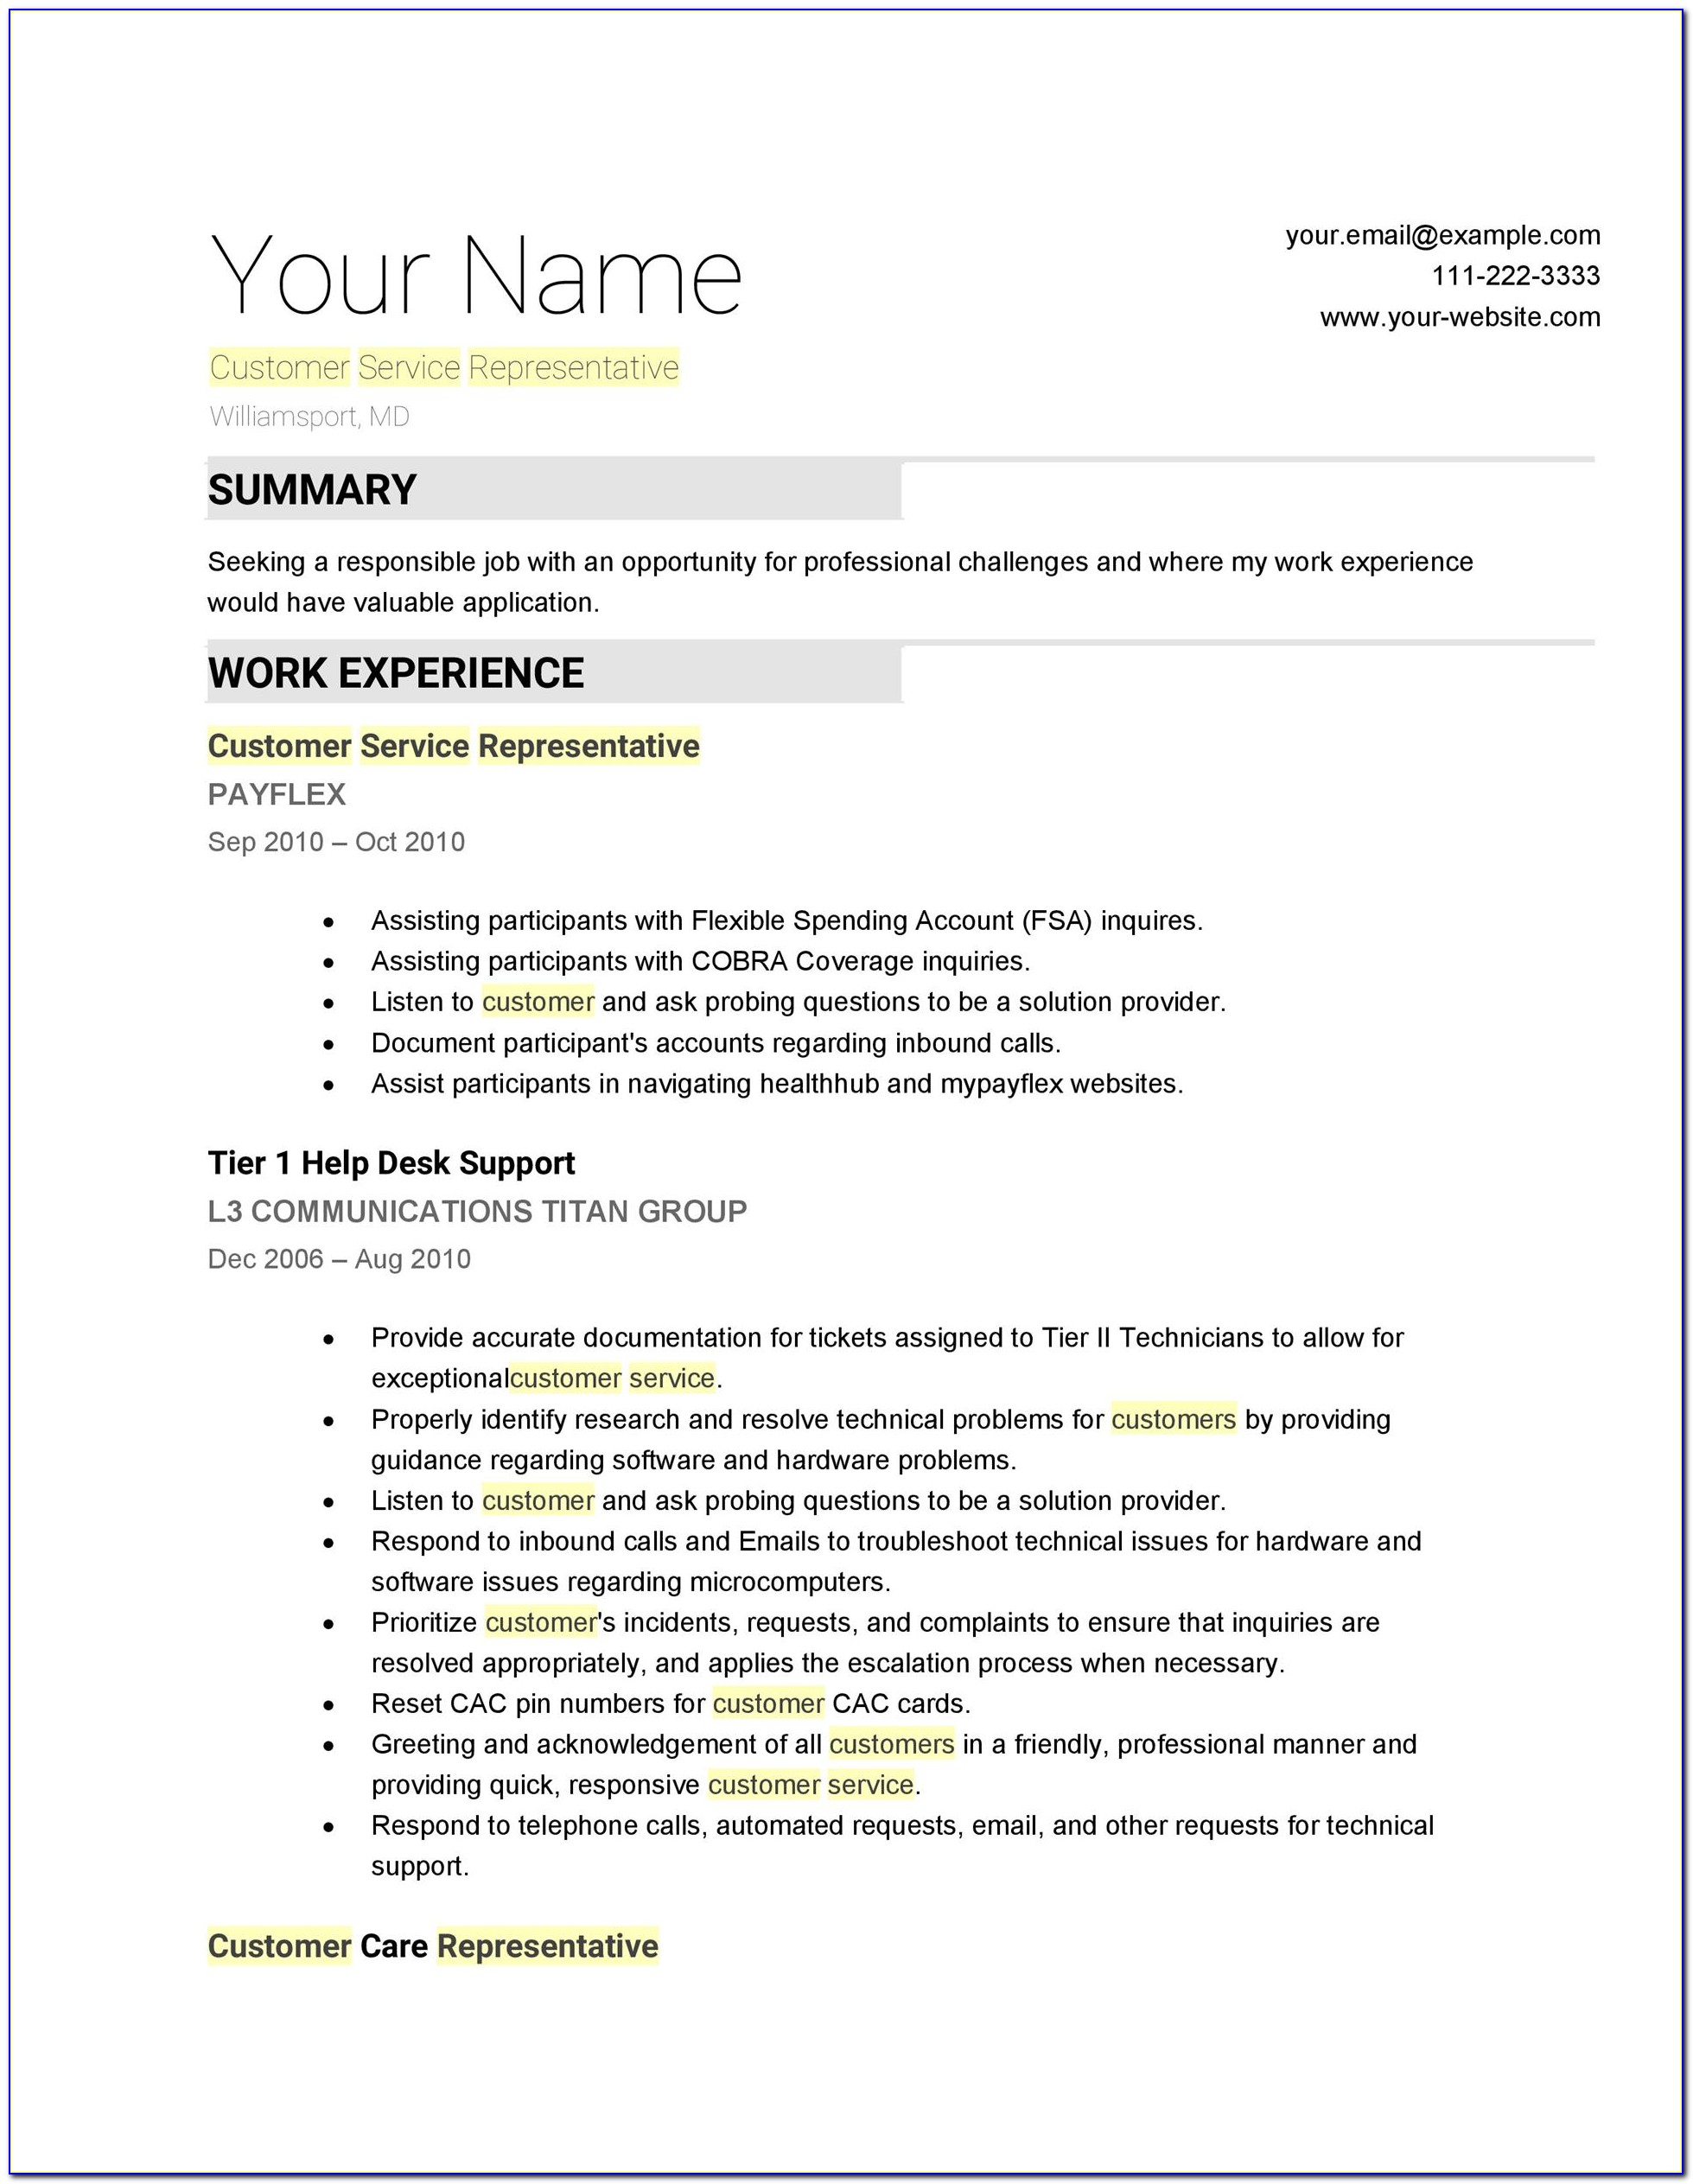 Resume Profile Example For Customer Service